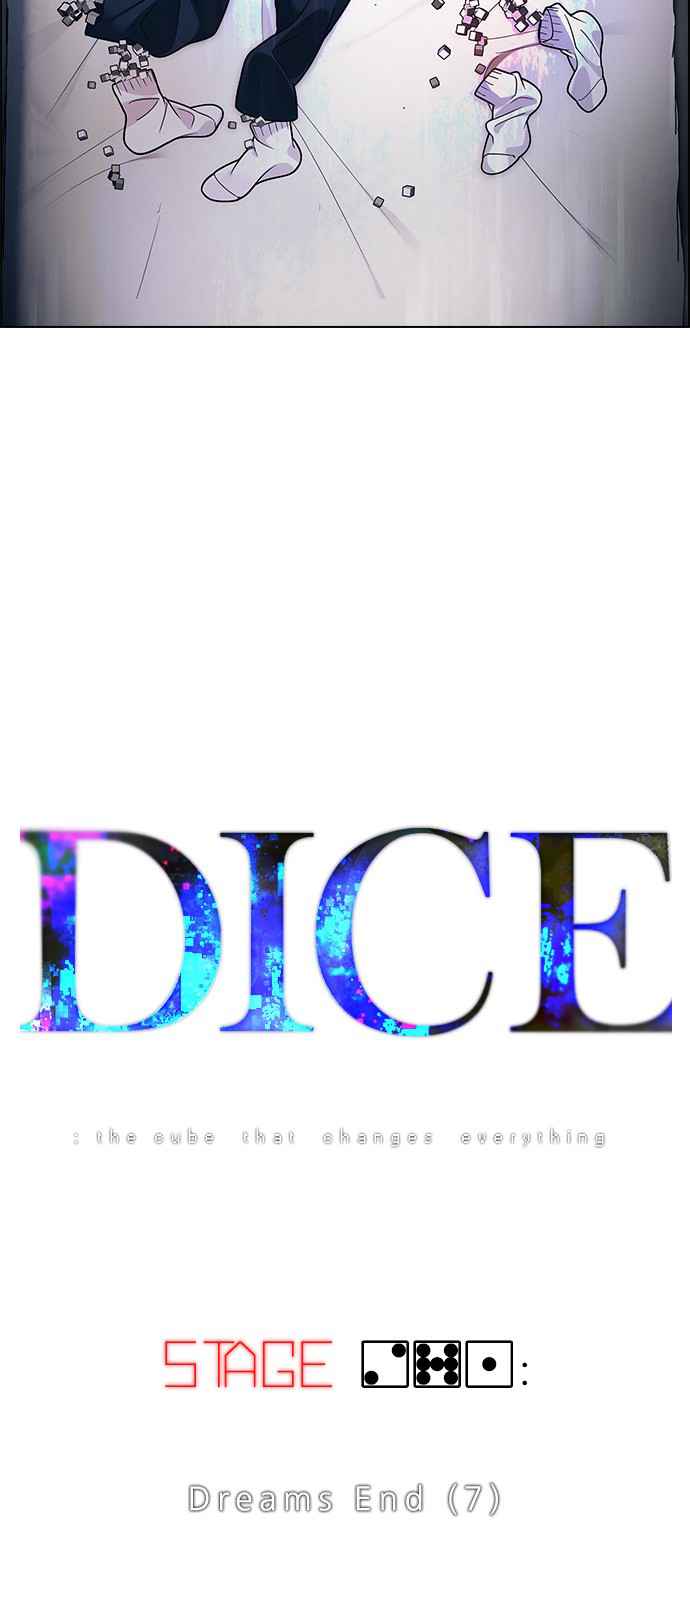 DICE: The Cube that Changes Everything Ch. 271 Dreams end (7)